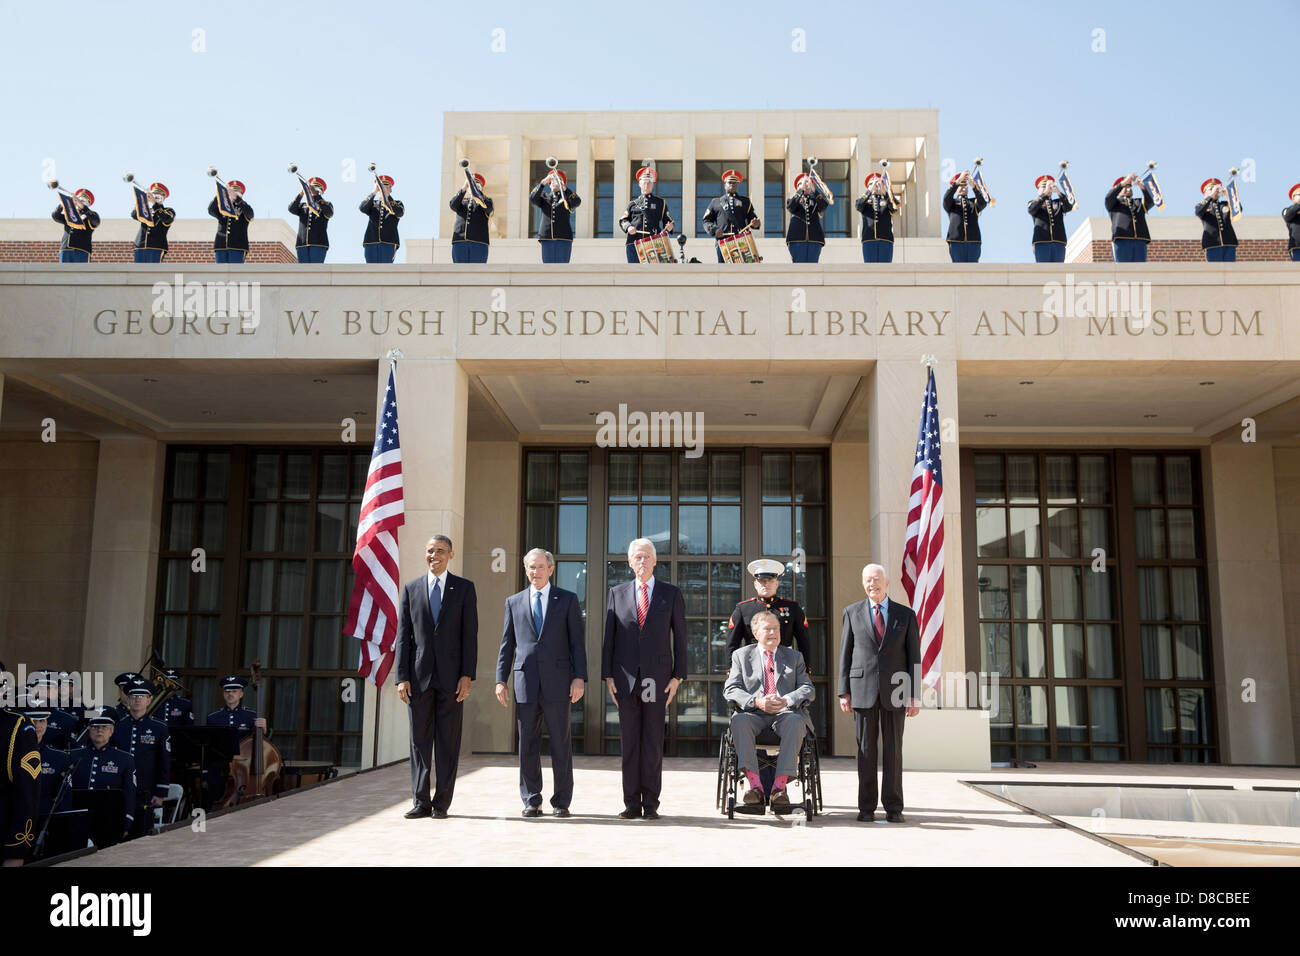 US President Barack Obama stands with former Presidents George W. Bush, Bill Clinton, George H.W. Bush, and Jimmy Carter during the dedication of the George W. Bush Presidential Library and Museum on the campus of Southern Methodist University April 25, 2013 in Dallas, Texas. Stock Photo